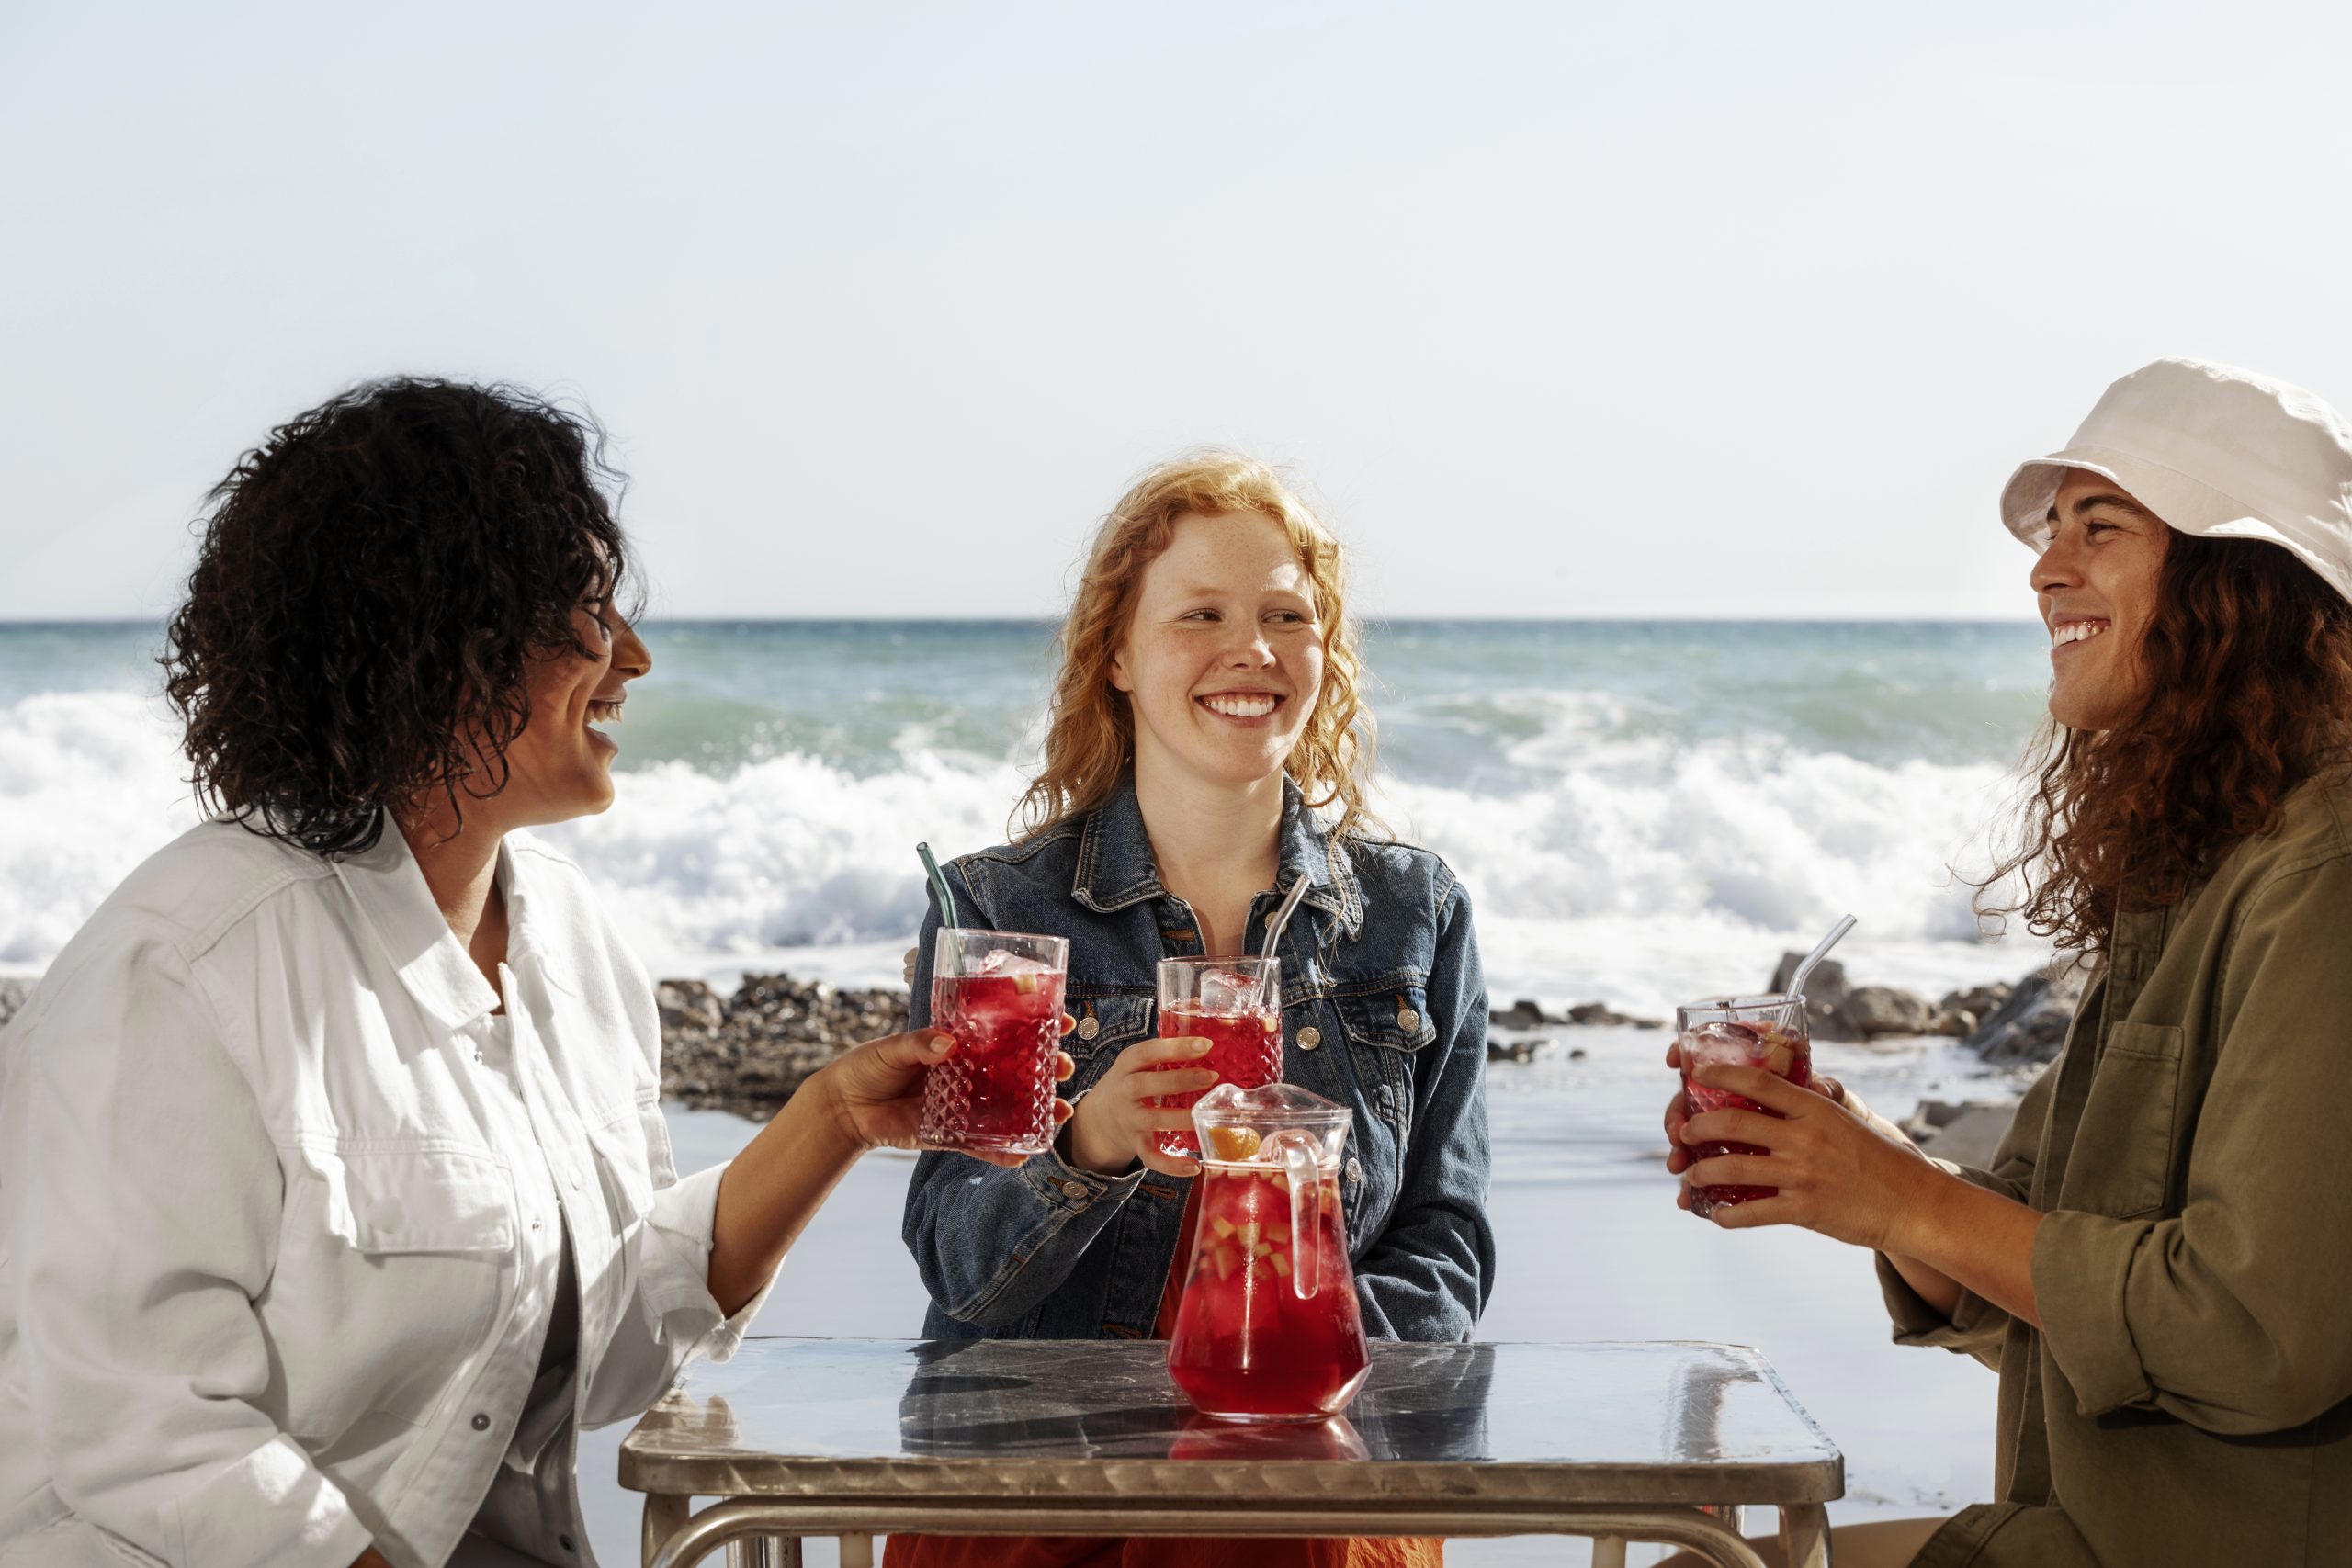 Tinto de Verano: Your Fun Guide to Spain's Iconic Summer Drink